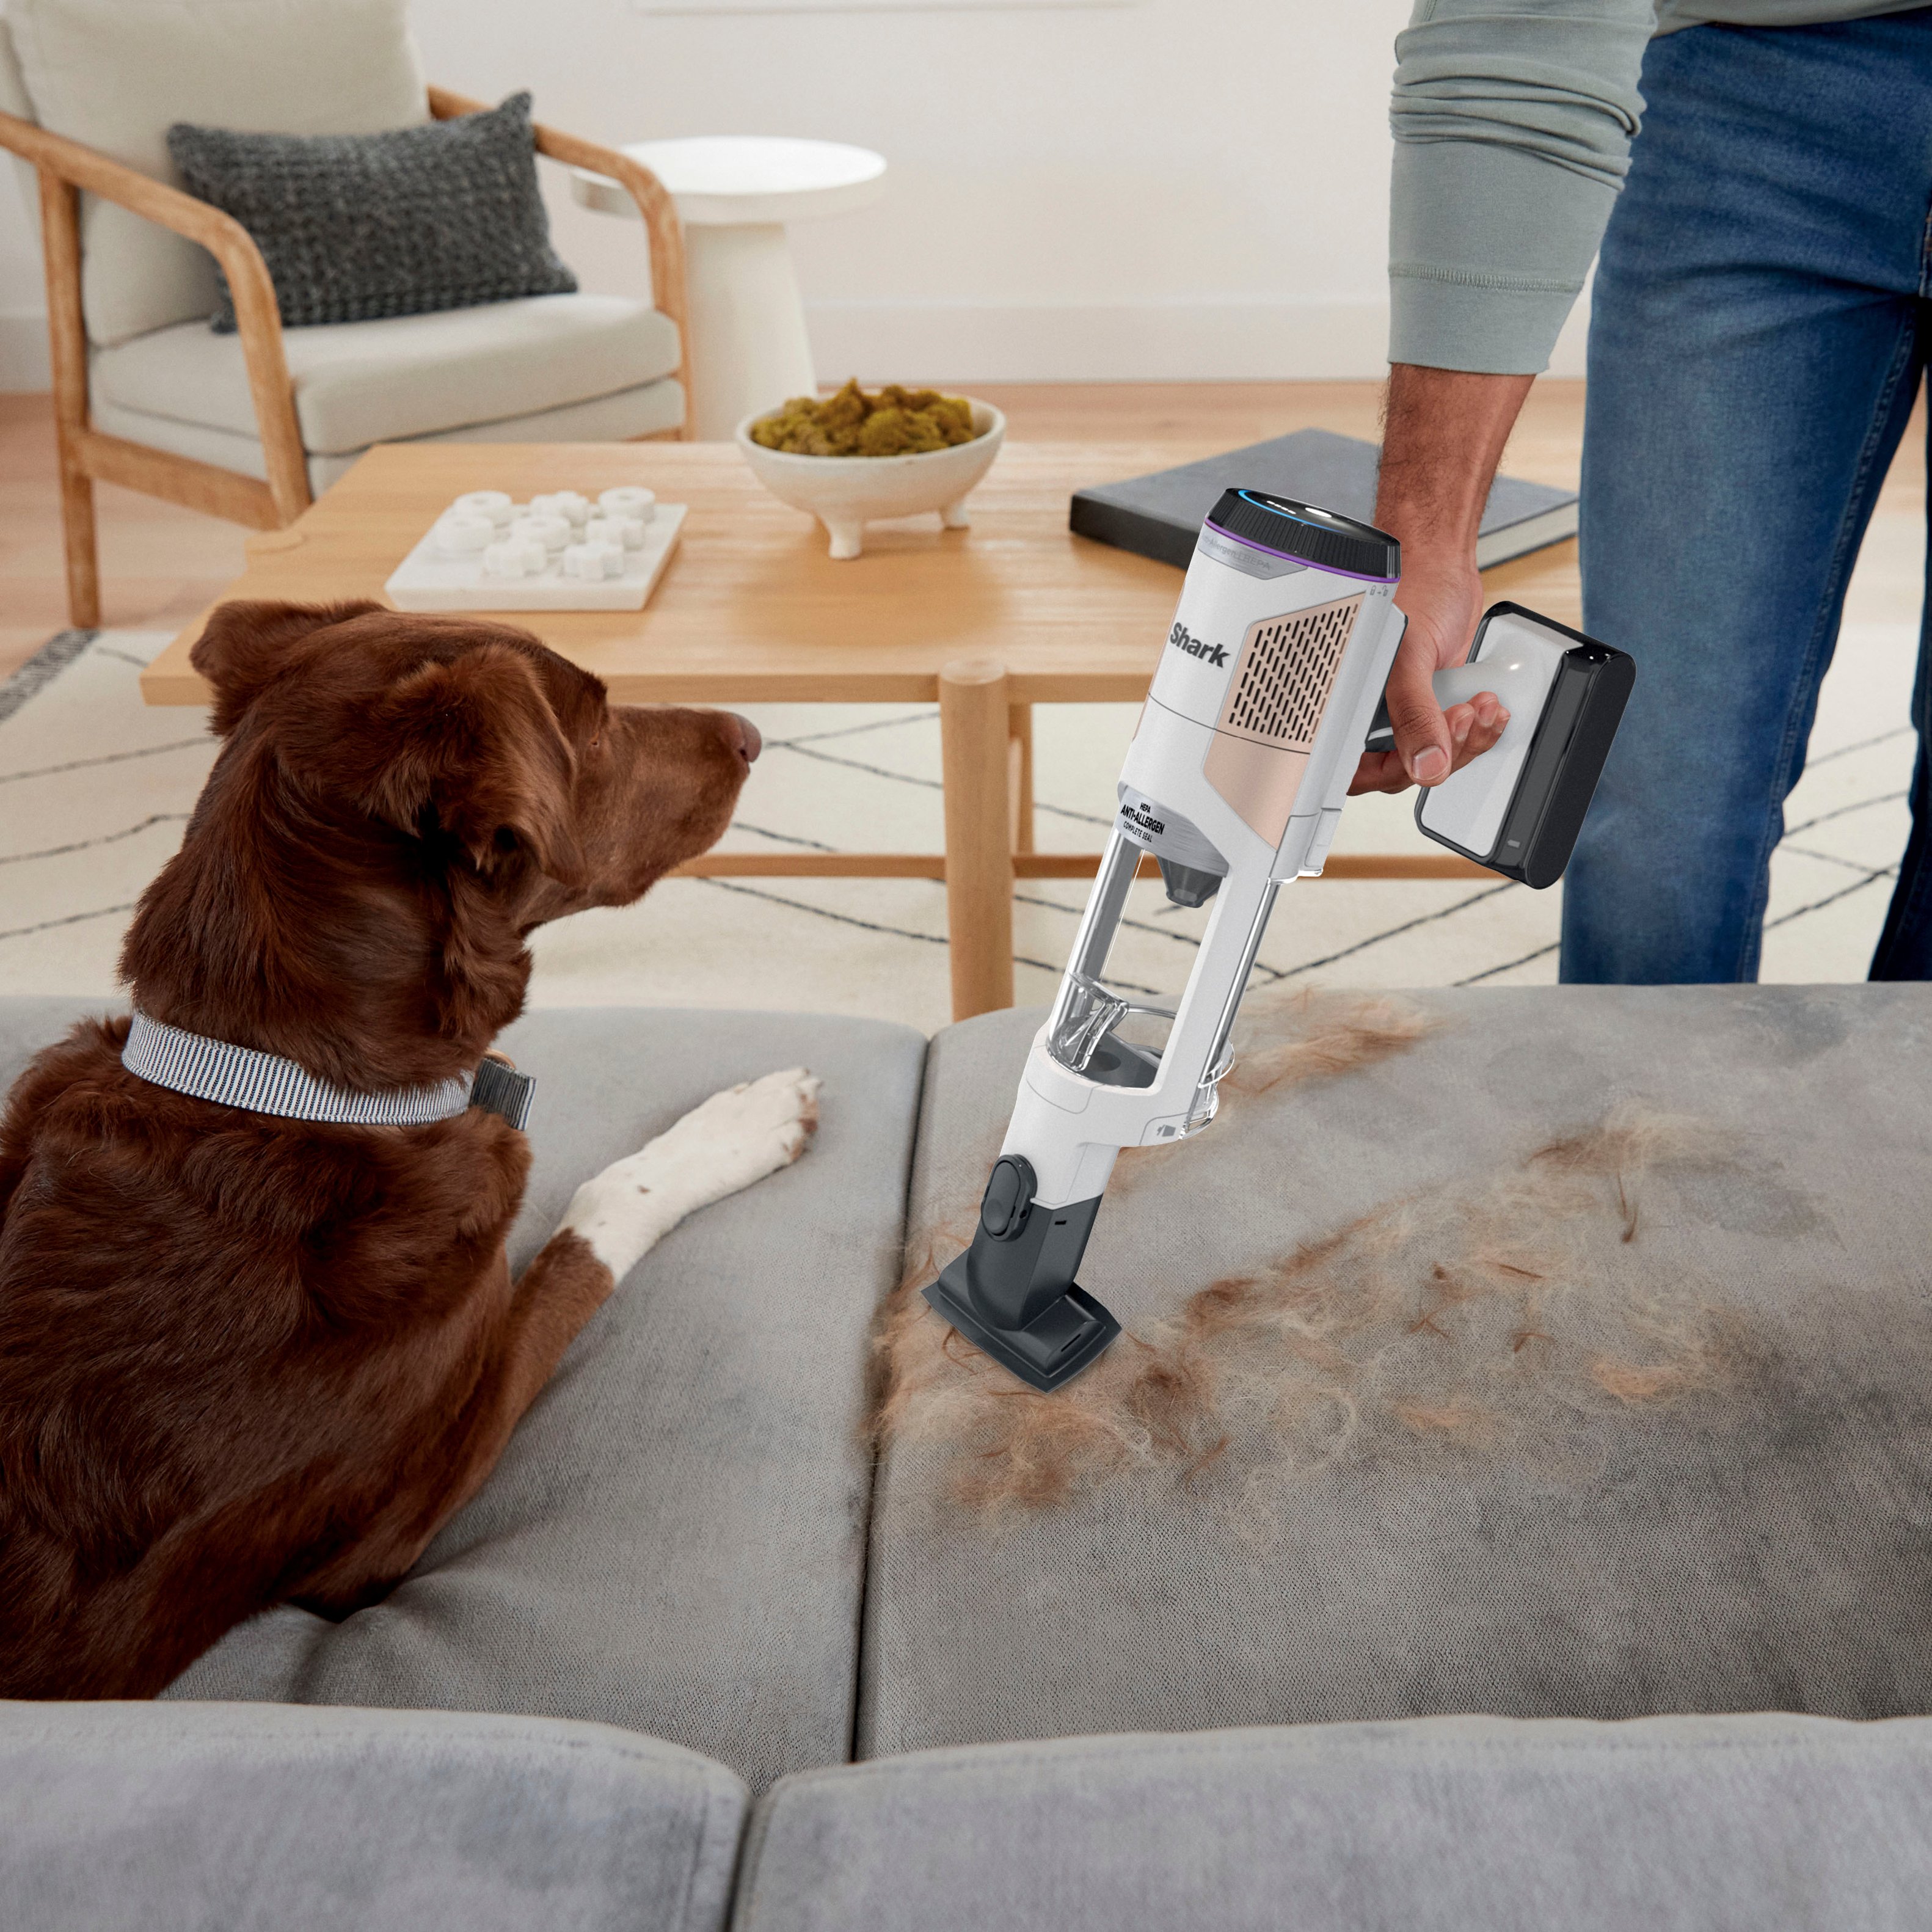 Shark Detect Pro Auto-Empty System, Cordless Vacuum with QuadClean